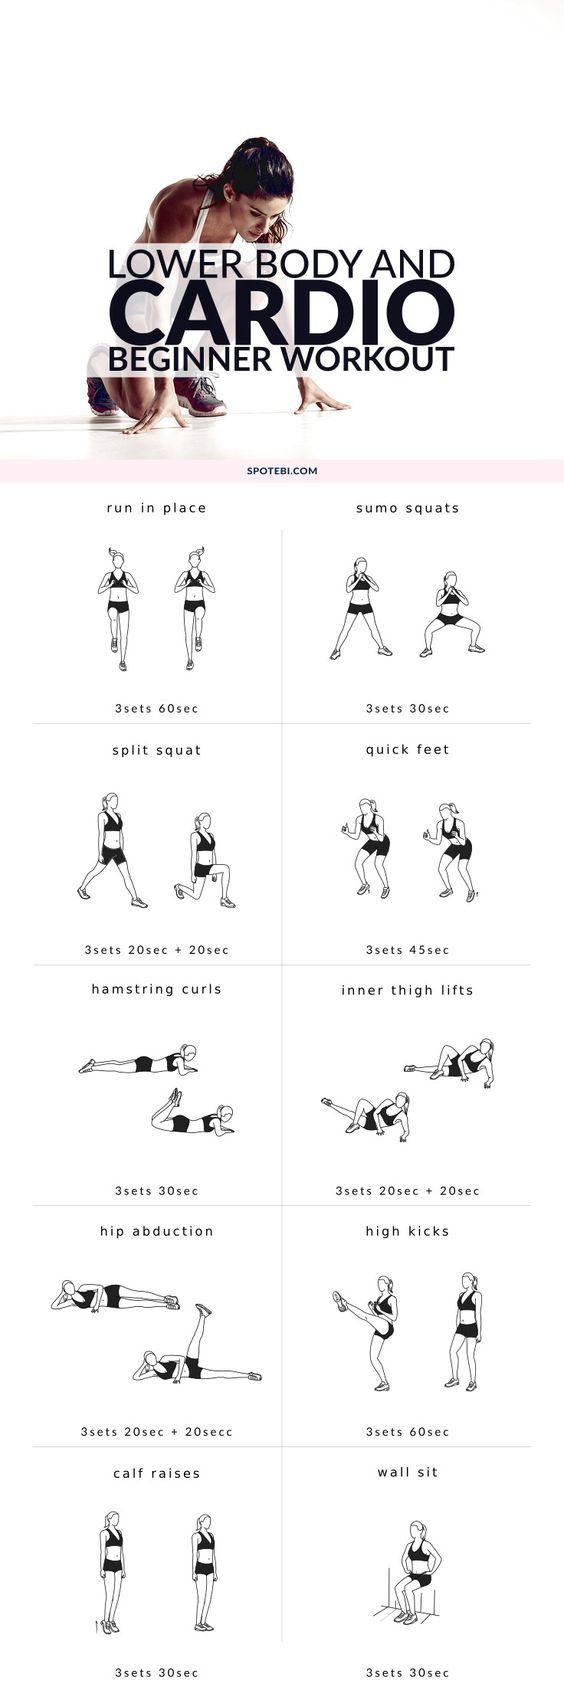 23 Beginner Fat Loss Workouts That You Can Do At Home Easily Trimmedandtoned